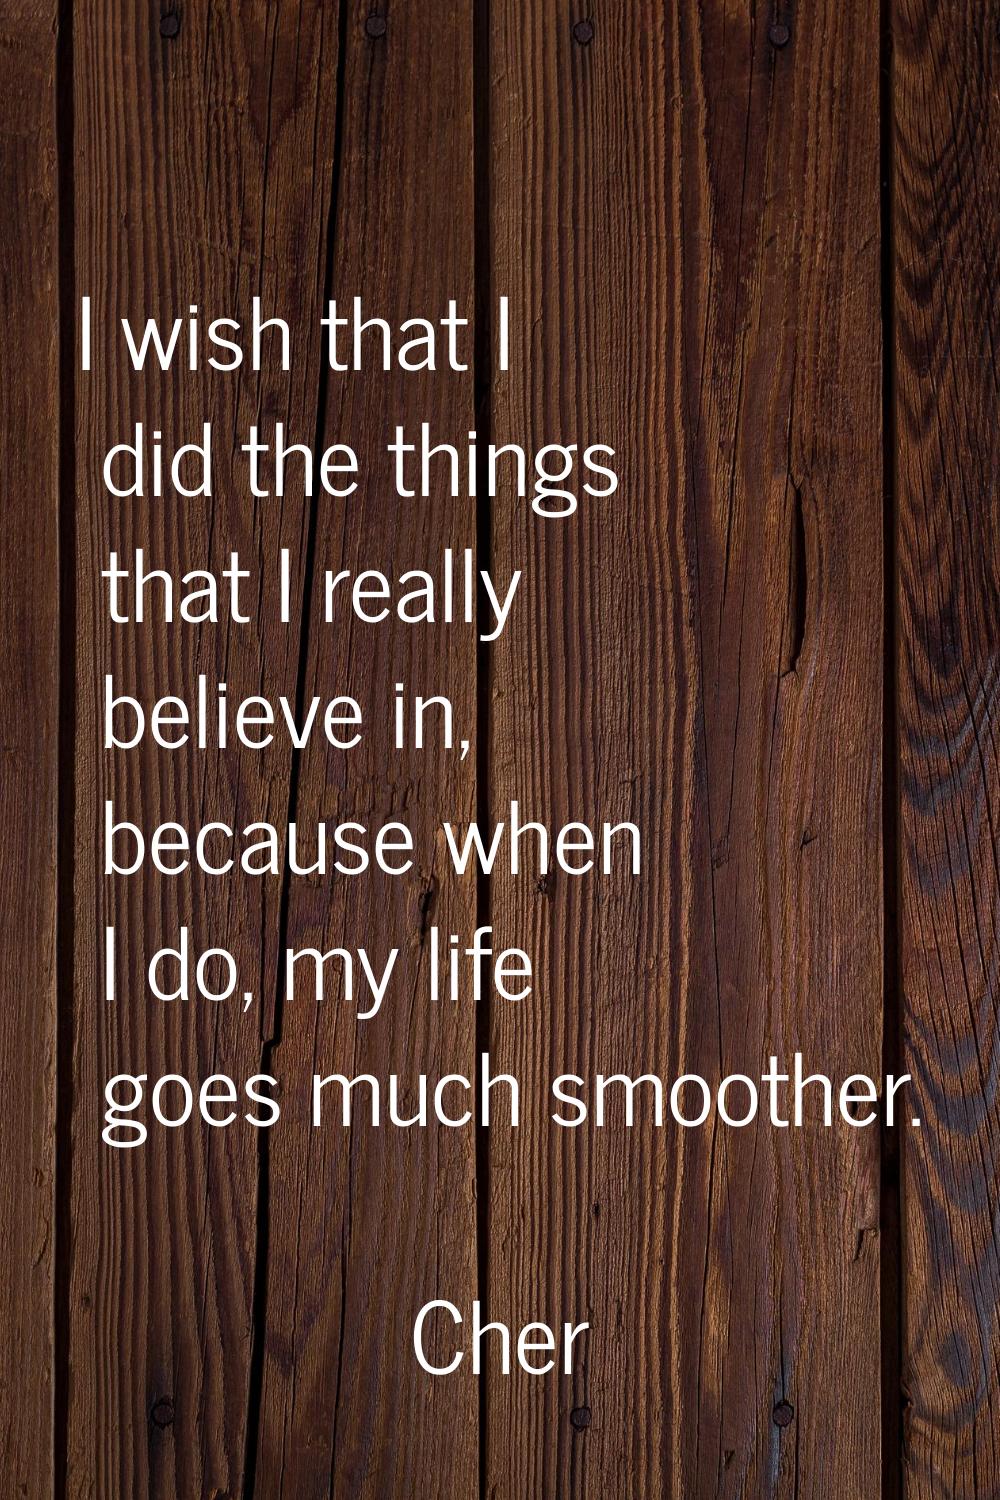 I wish that I did the things that I really believe in, because when I do, my life goes much smoothe